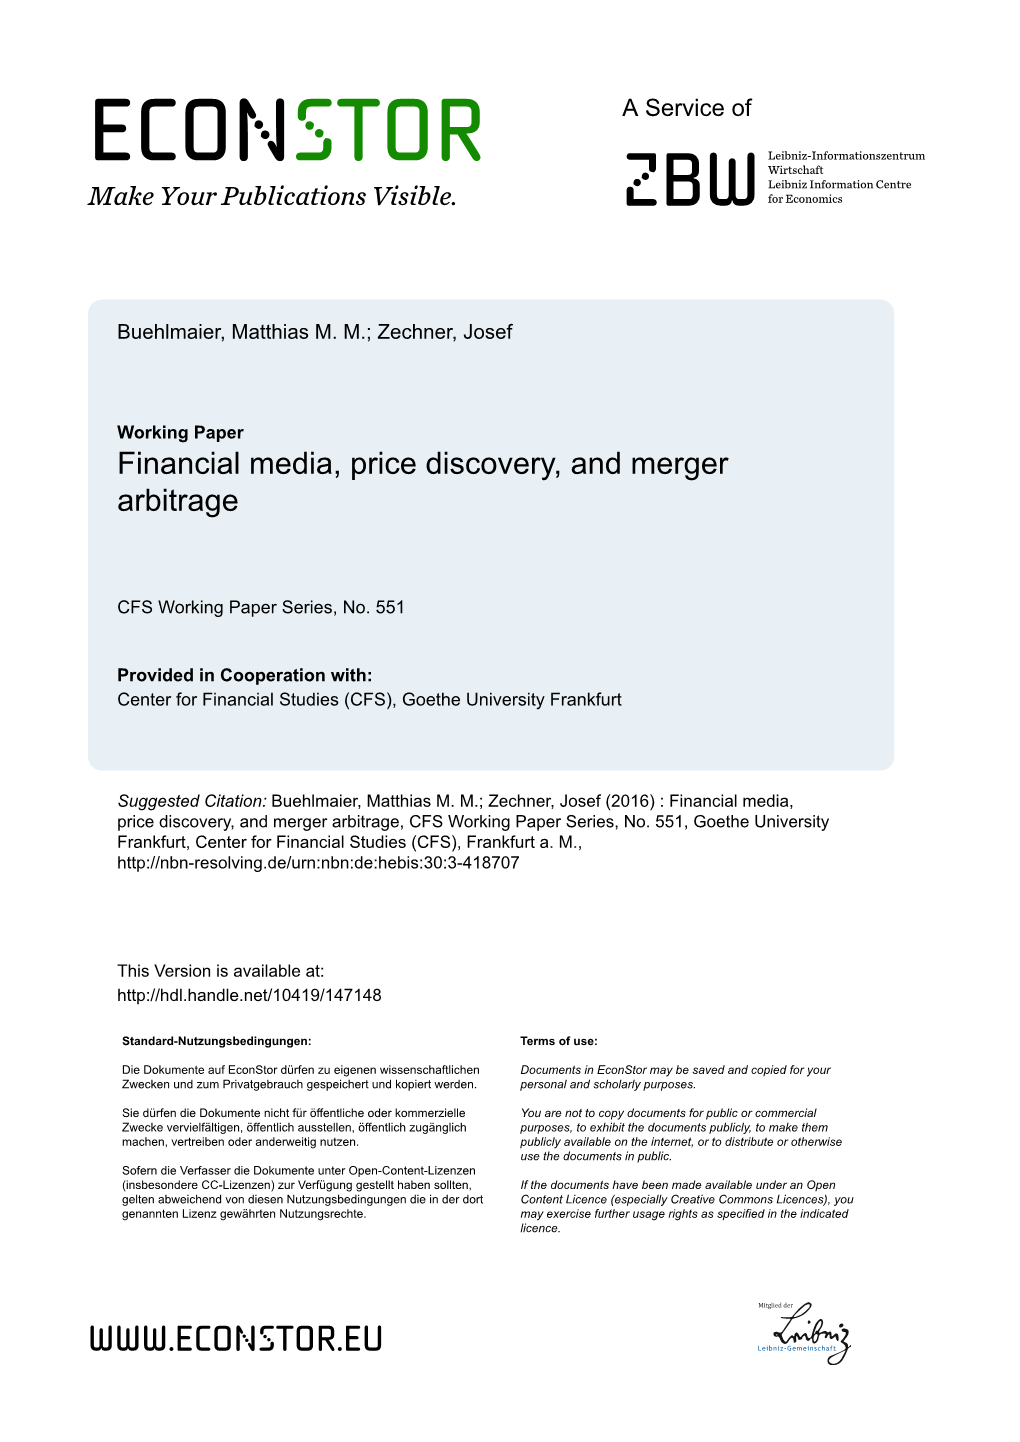 Financial Media, Price Discovery, and Merger Arbitrage